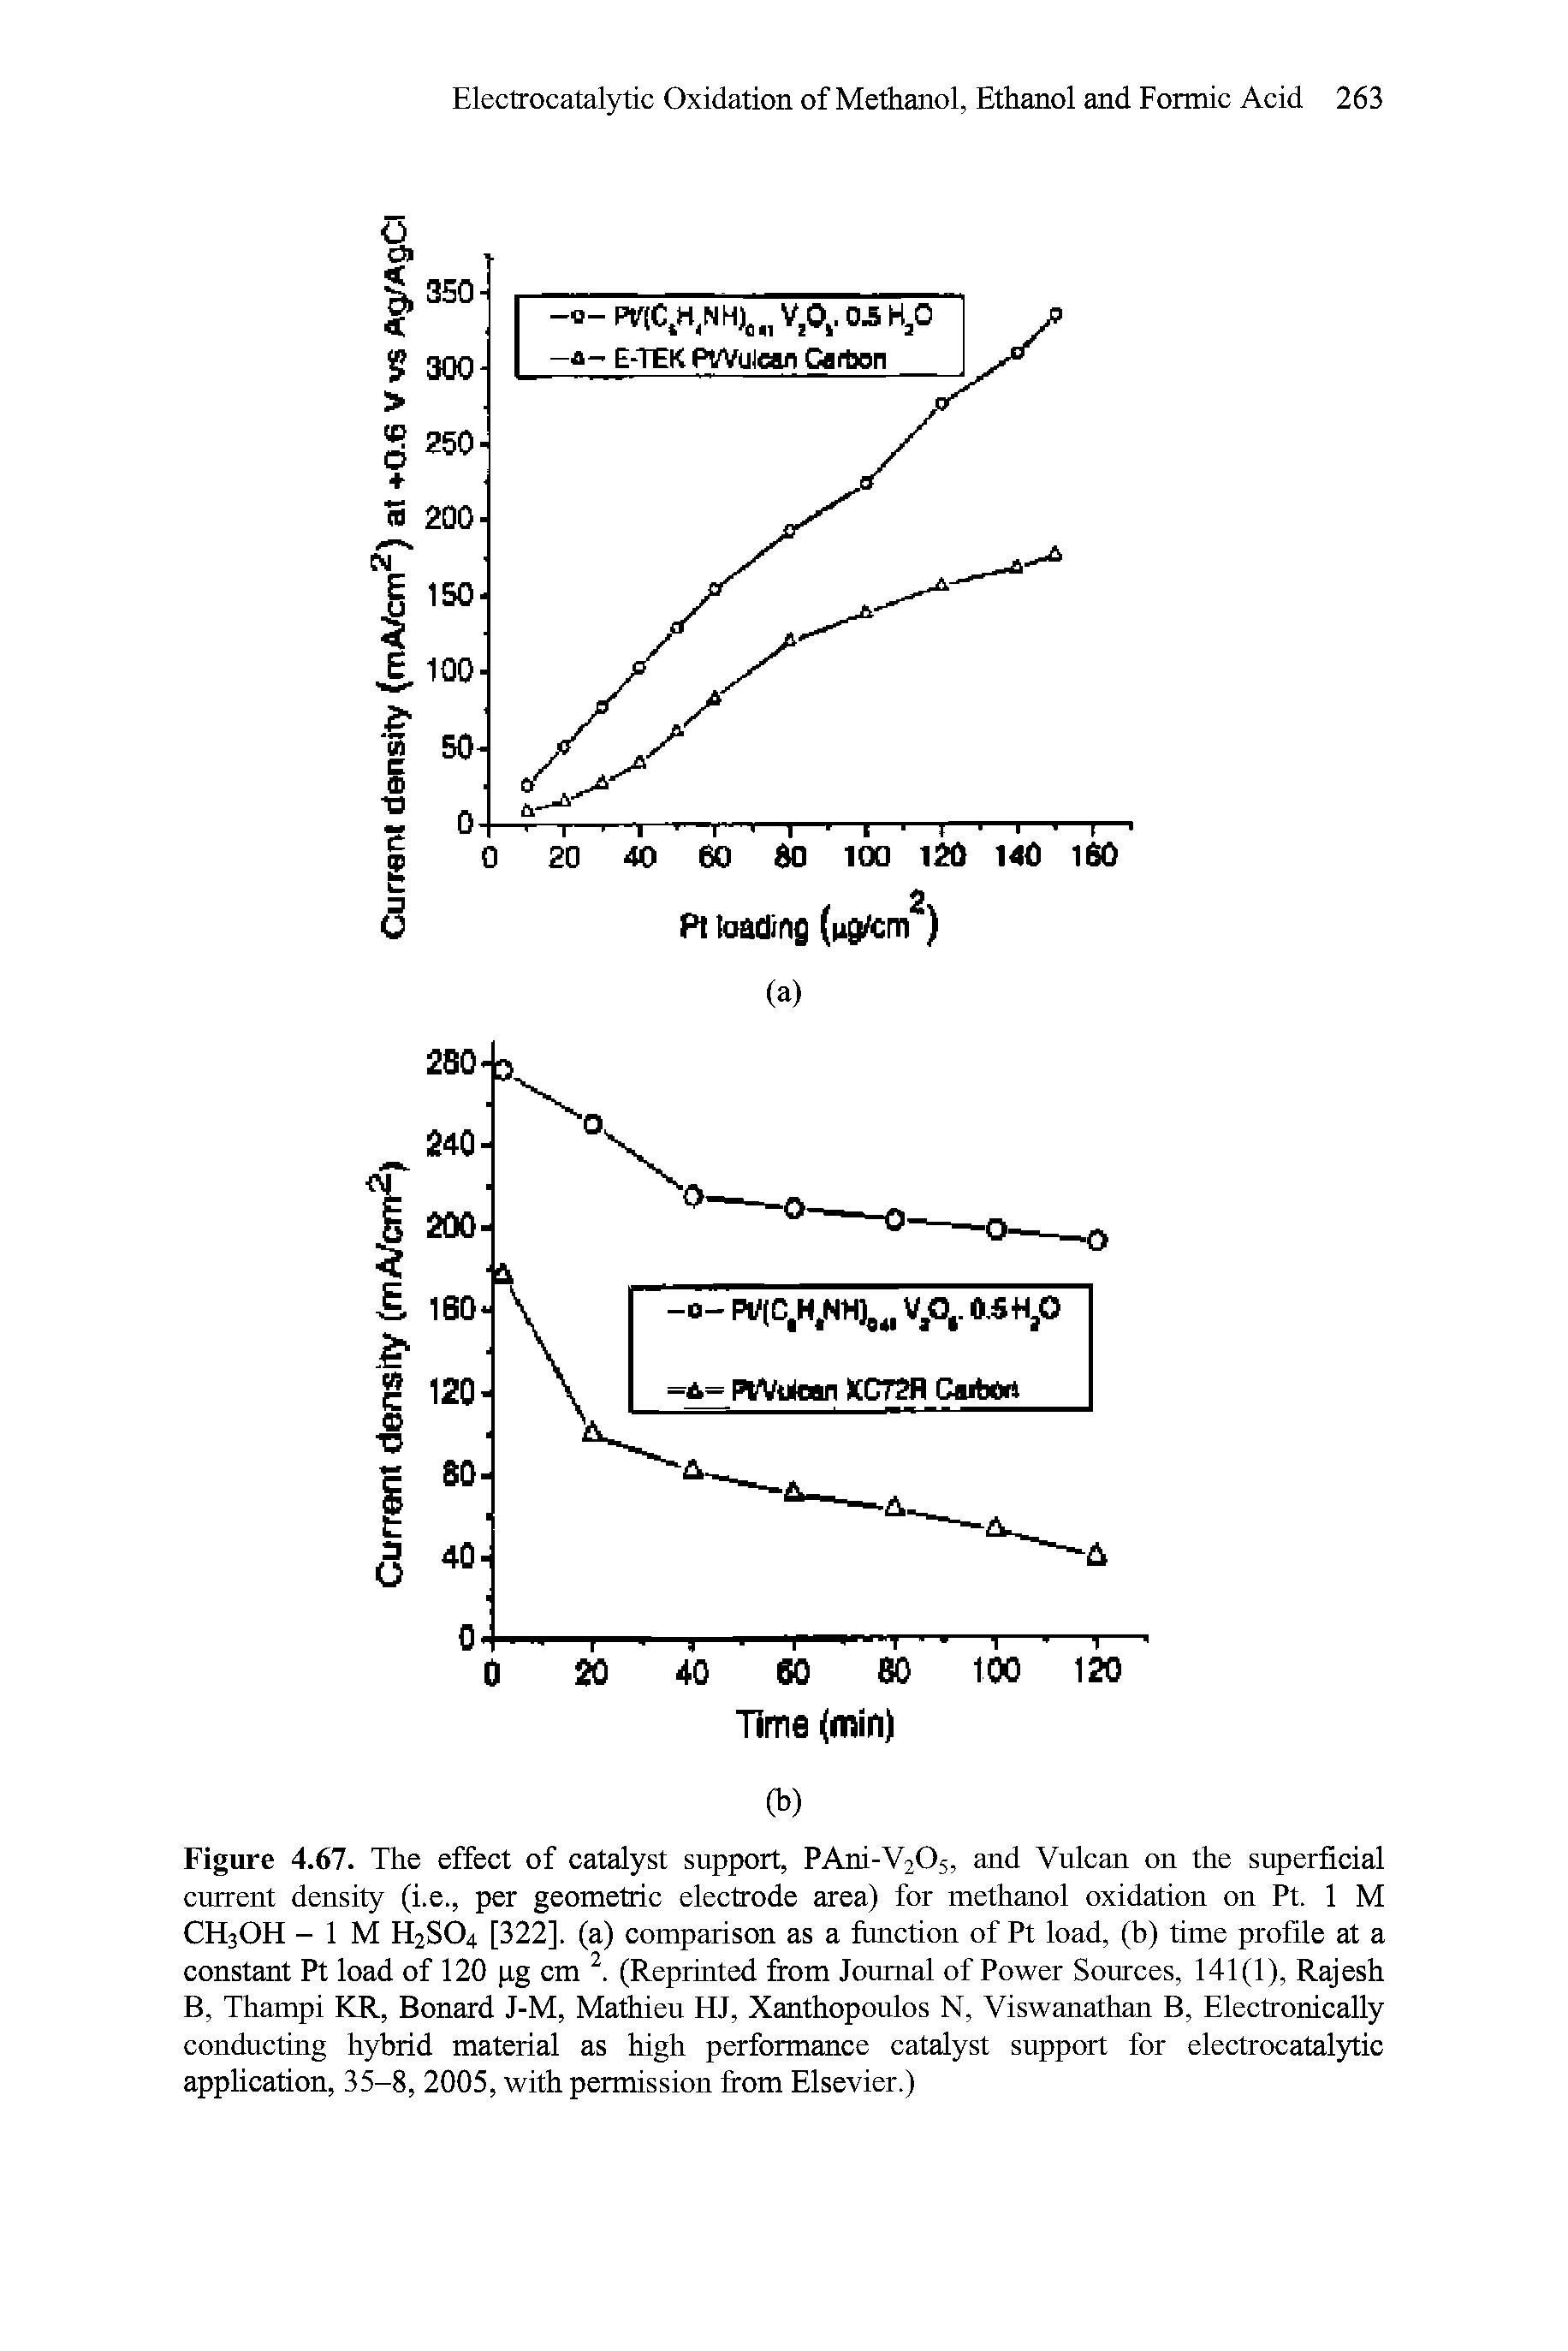 Figure 4.67. The effect of catalyst support, PAni-V205, and Vulcan on the superficial current density (i.e., per geometric electrode area) for methanol oxidation on Pt. 1 M CEI3OH - 1 M H2SO4 [322]. (a) comparison as a function of Pt load, (b) time profile at a constant Pt load of 120 pg cm (Reprinted from Journal of Power Sources, 141(1), Rajesh B, Thampi KR, Bonard J-M, Mathieu HJ, Xanthopoulos N, Viswanathan B, Electronically conducting hybrid material as high performance catalyst support for electrocatal5dic appHcation, 35-8, 2005, with permission from Elsevier.)...